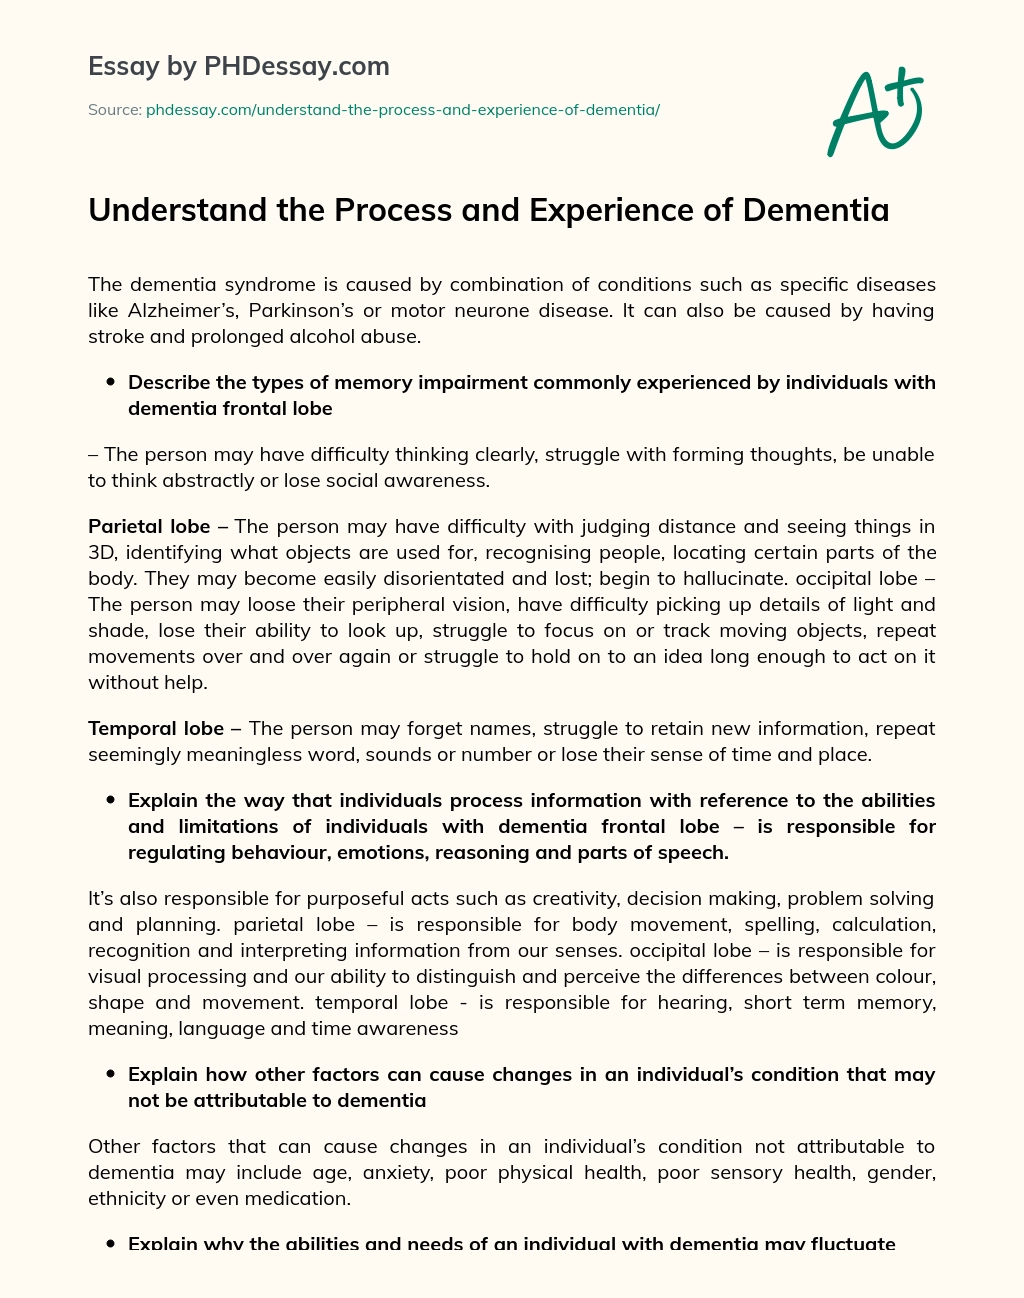 Understand the Process and Experience of Dementia essay